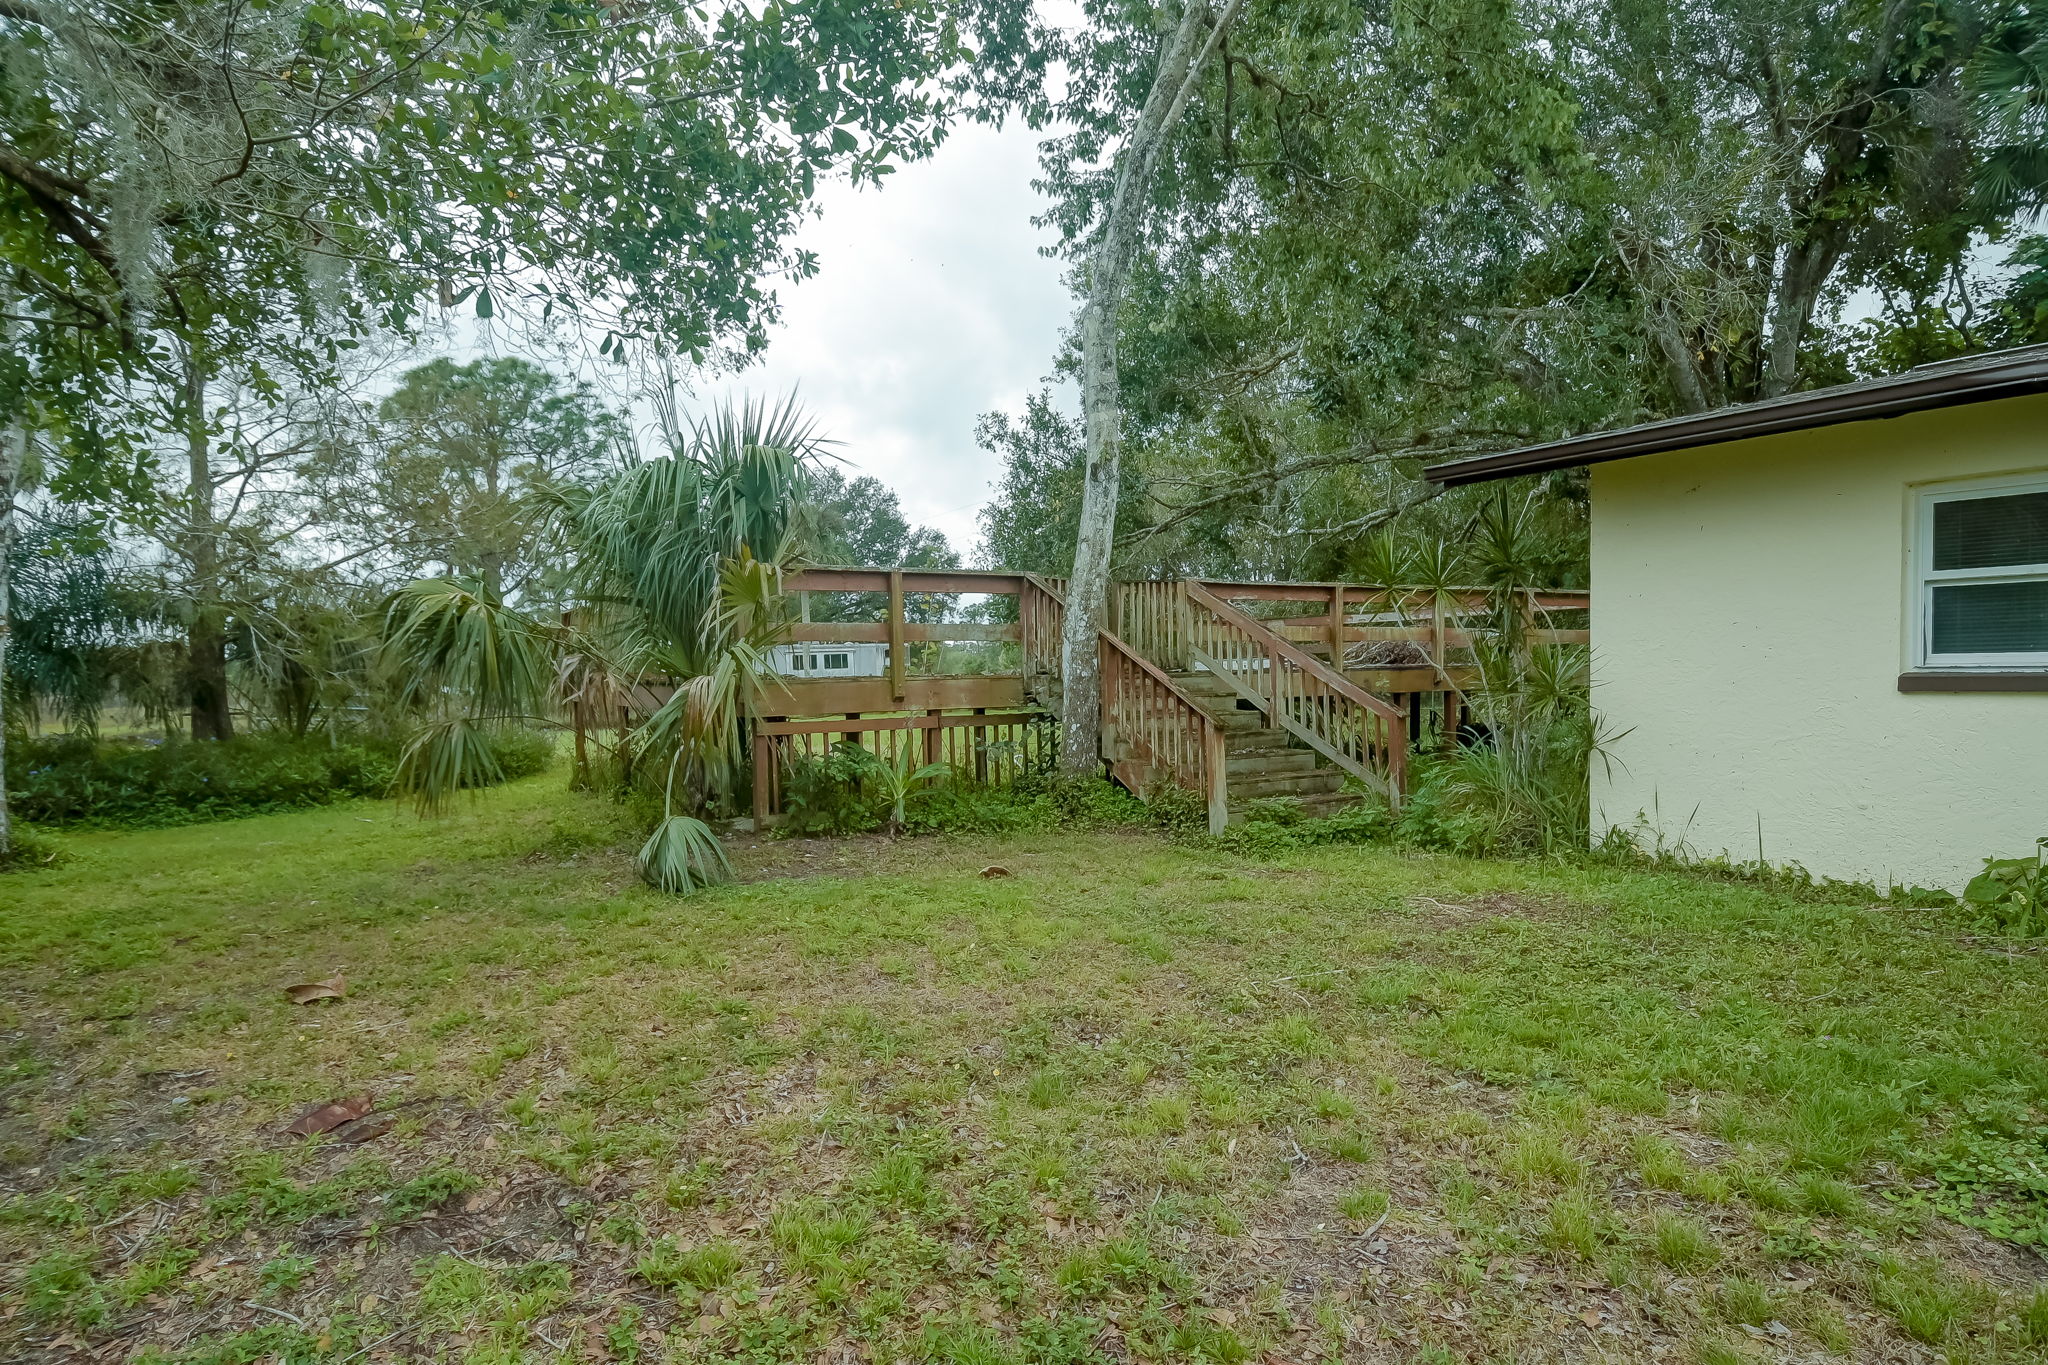 5261 Obannon Rd, Fort Myers, FL 33905, USA Photo 22